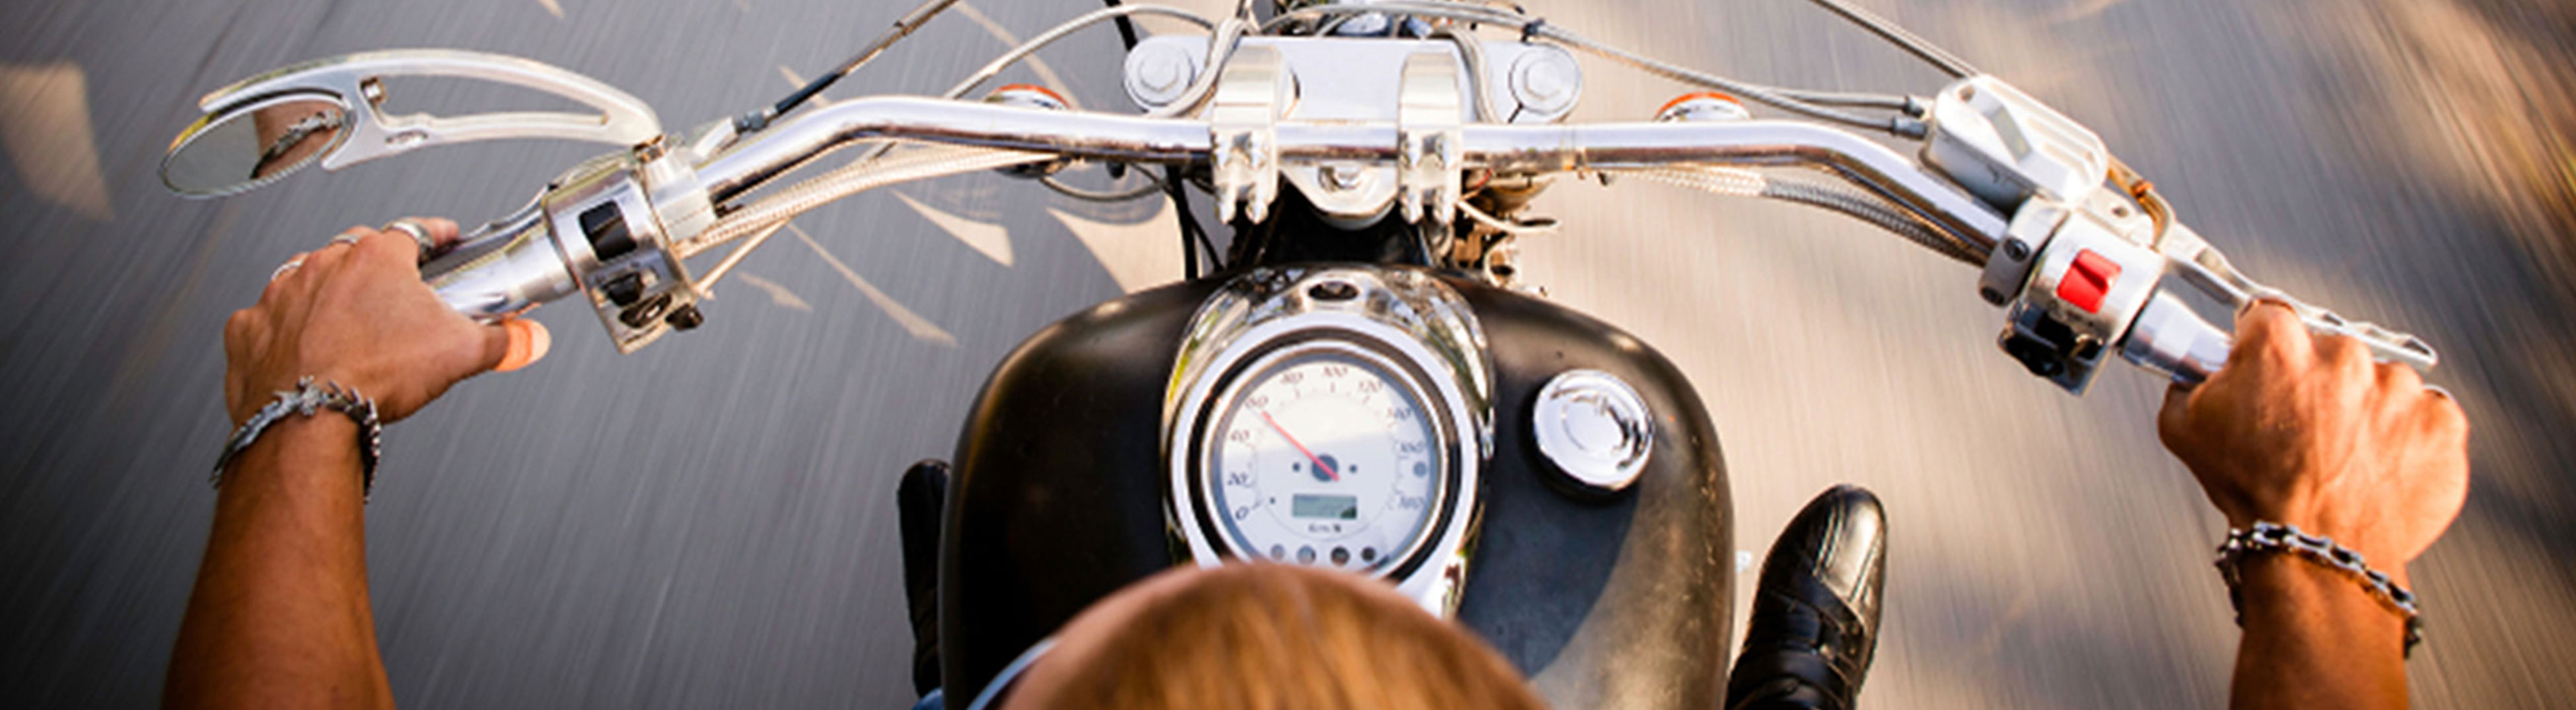 Delaware Motorcycle insurance coverage